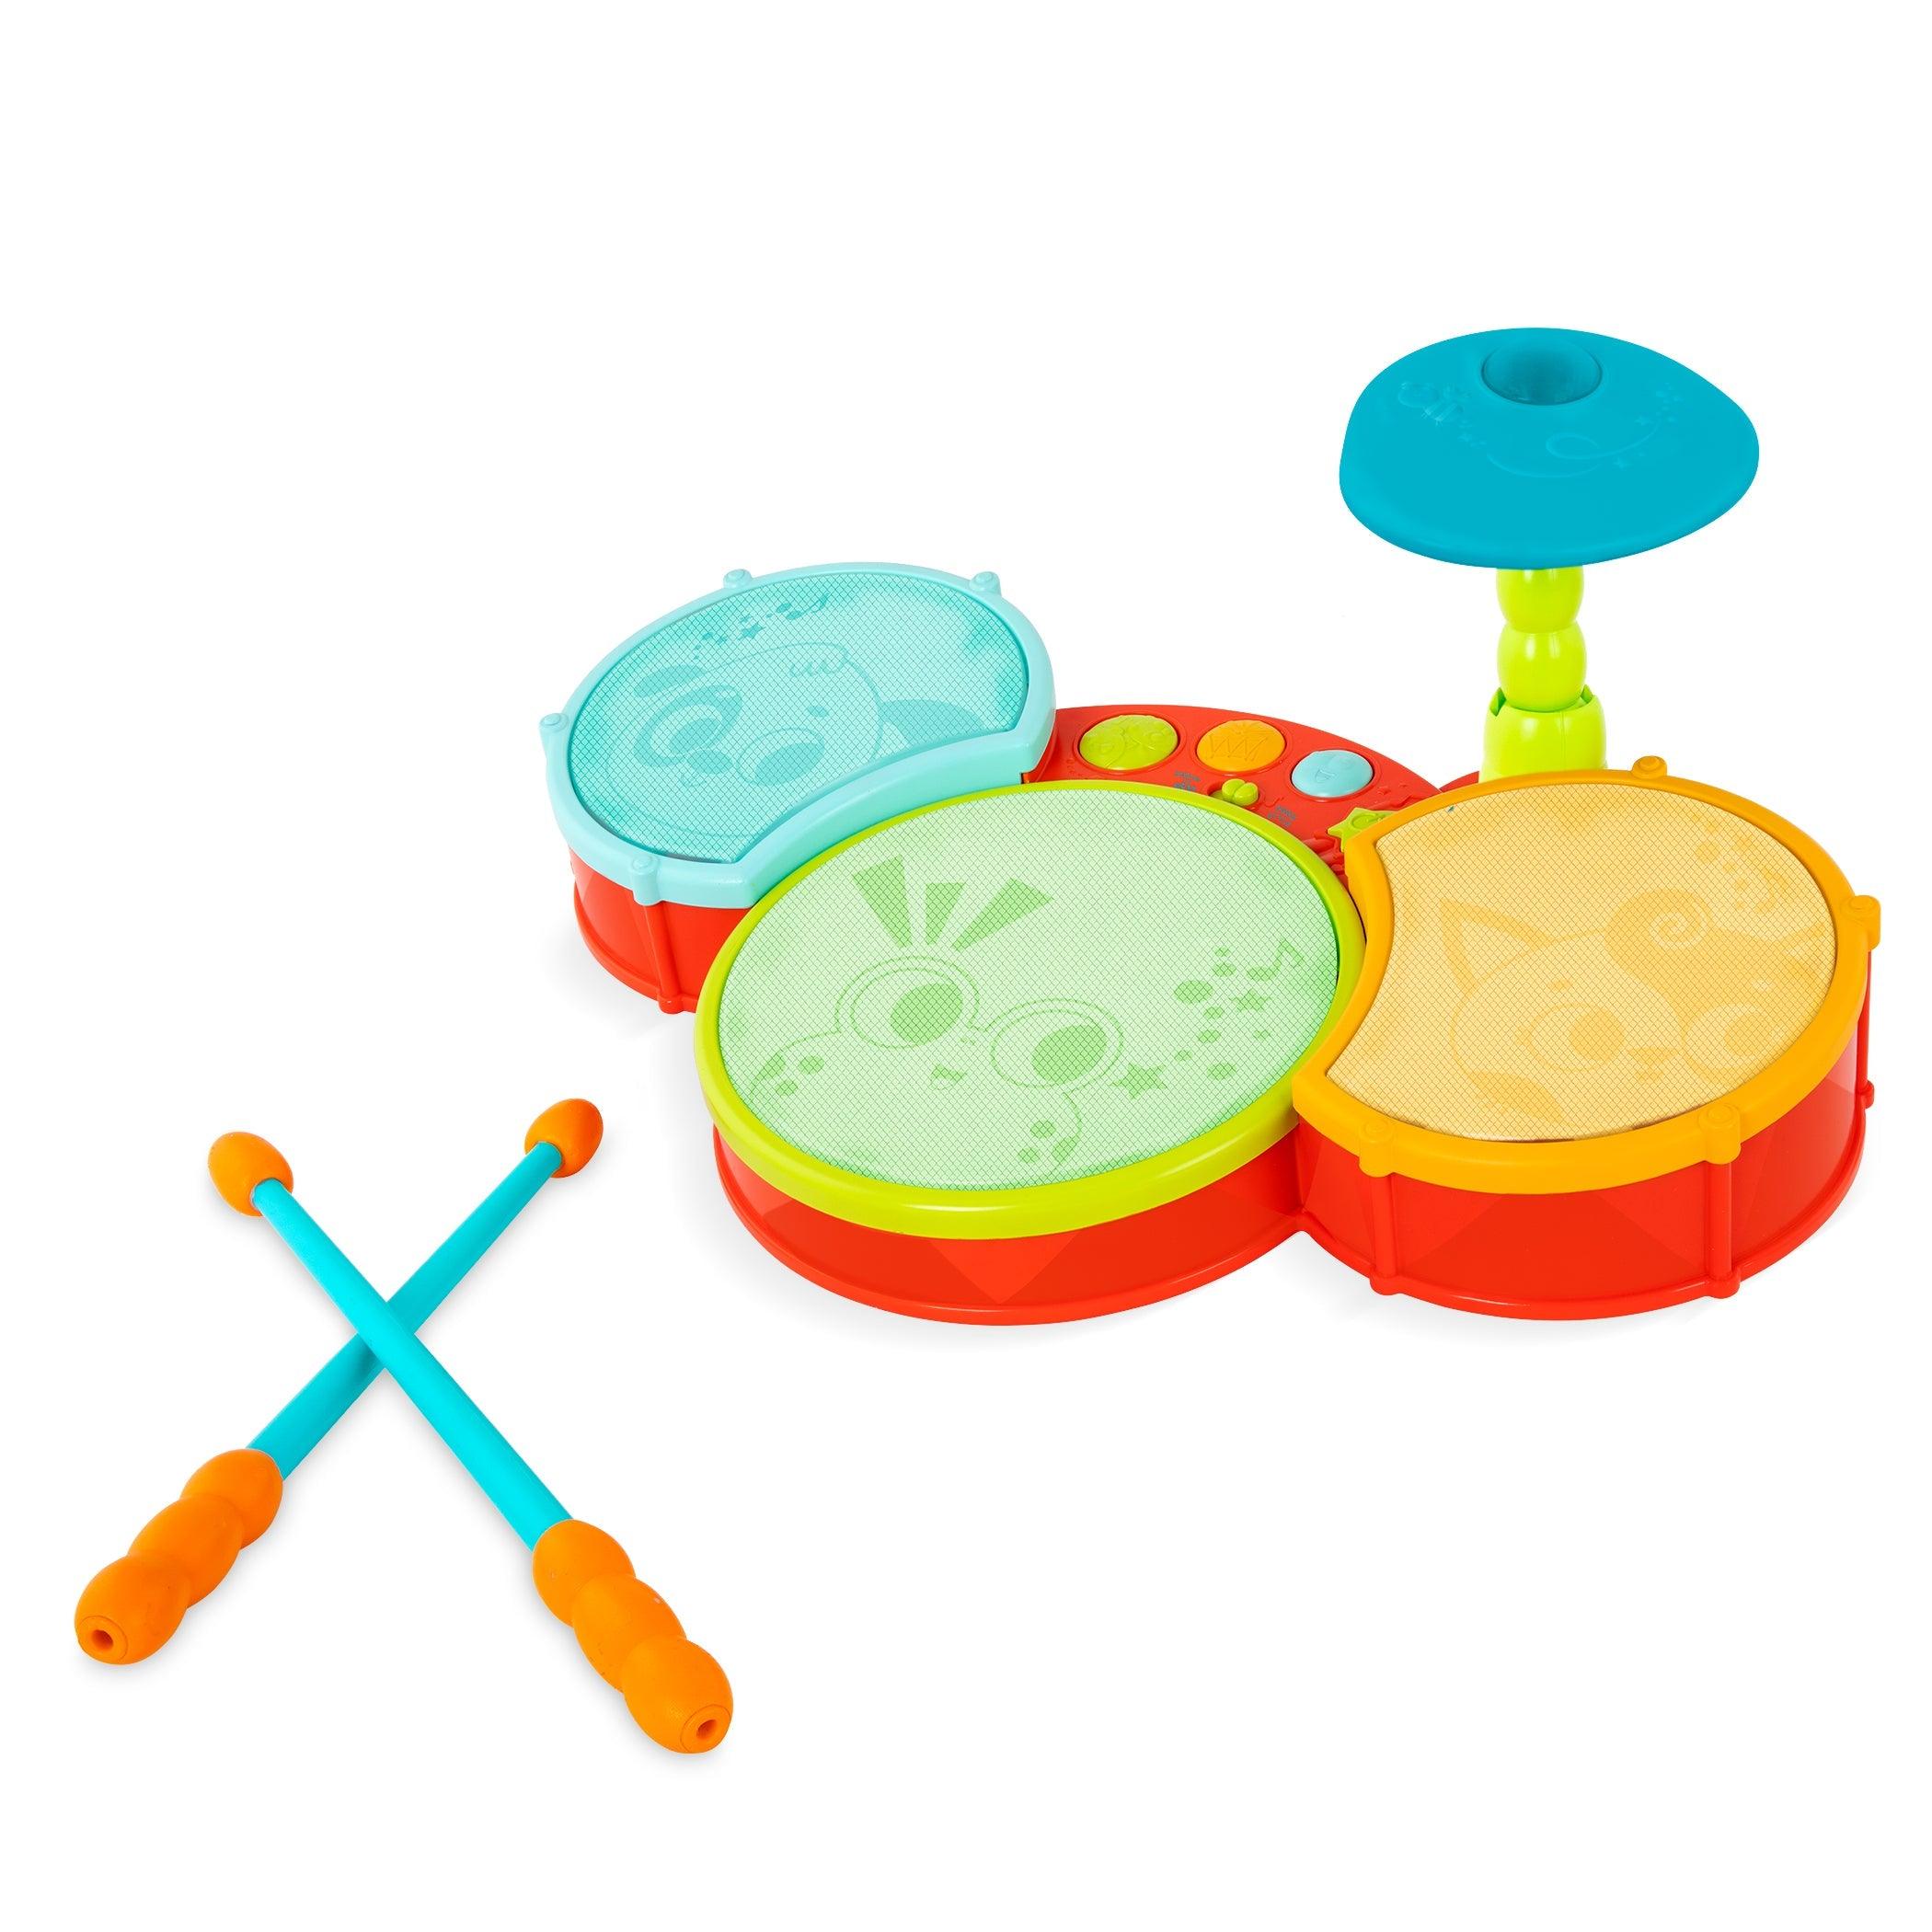 B.Toys: Little Beats Land of B interactive drums.